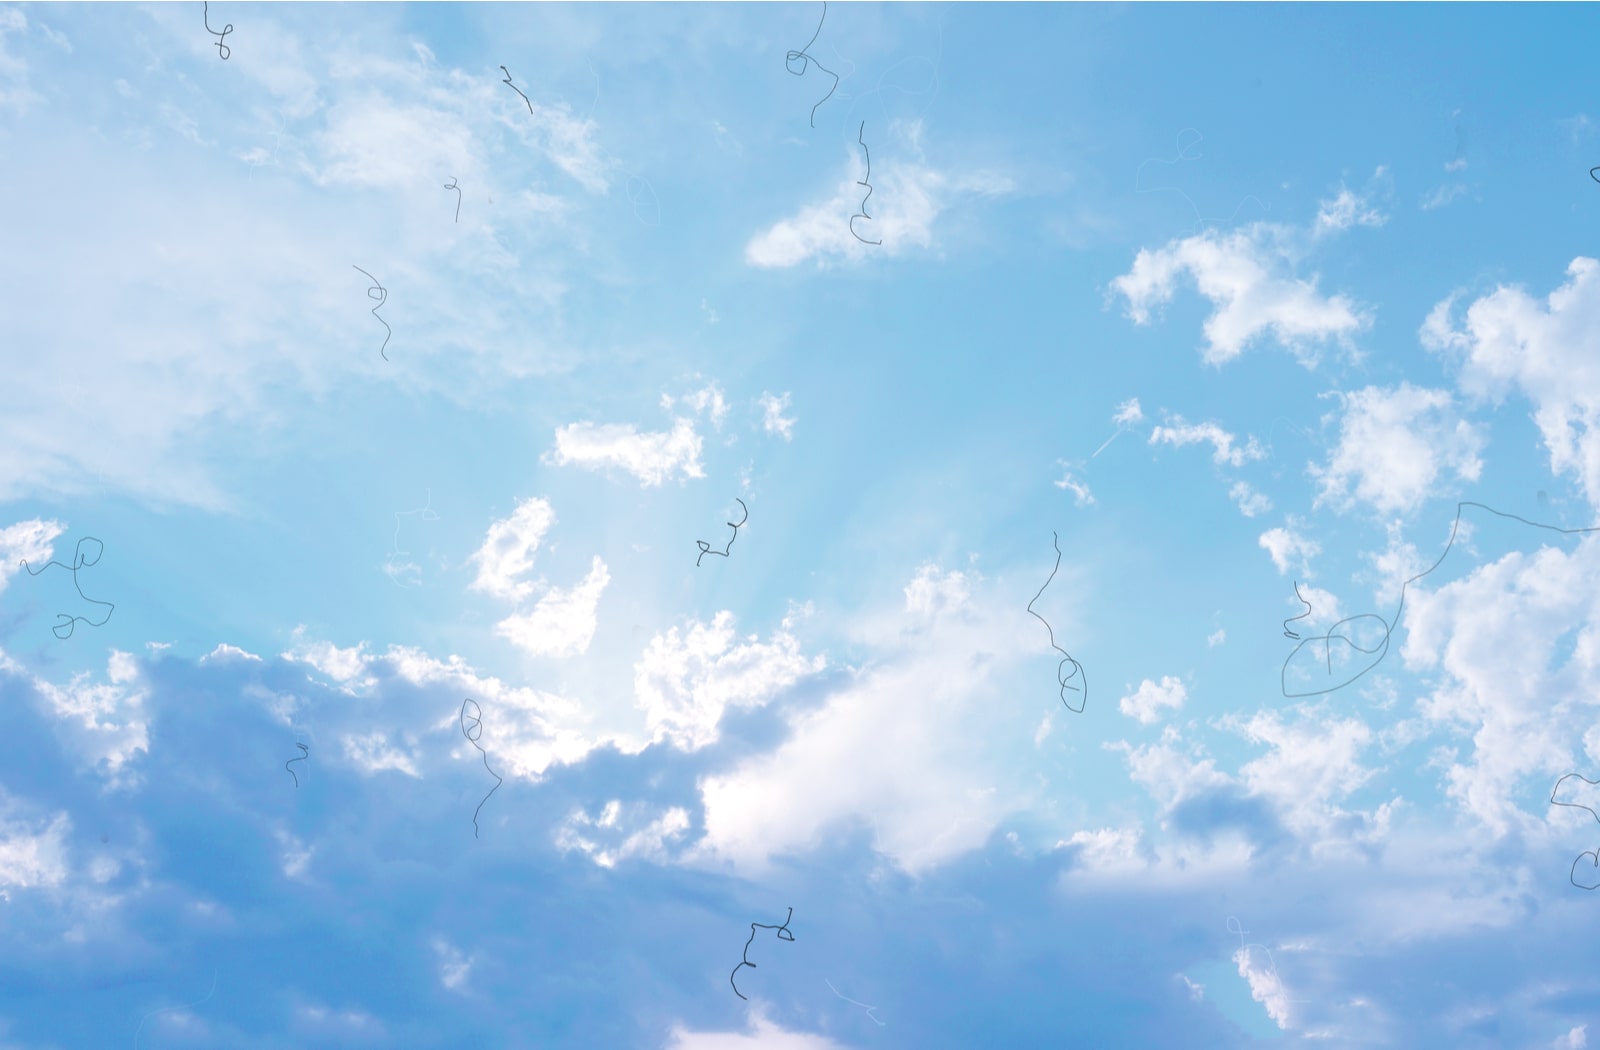 An image of a sunny sky with clouds, with lines and squiggles over the image to show what eye floaters look like